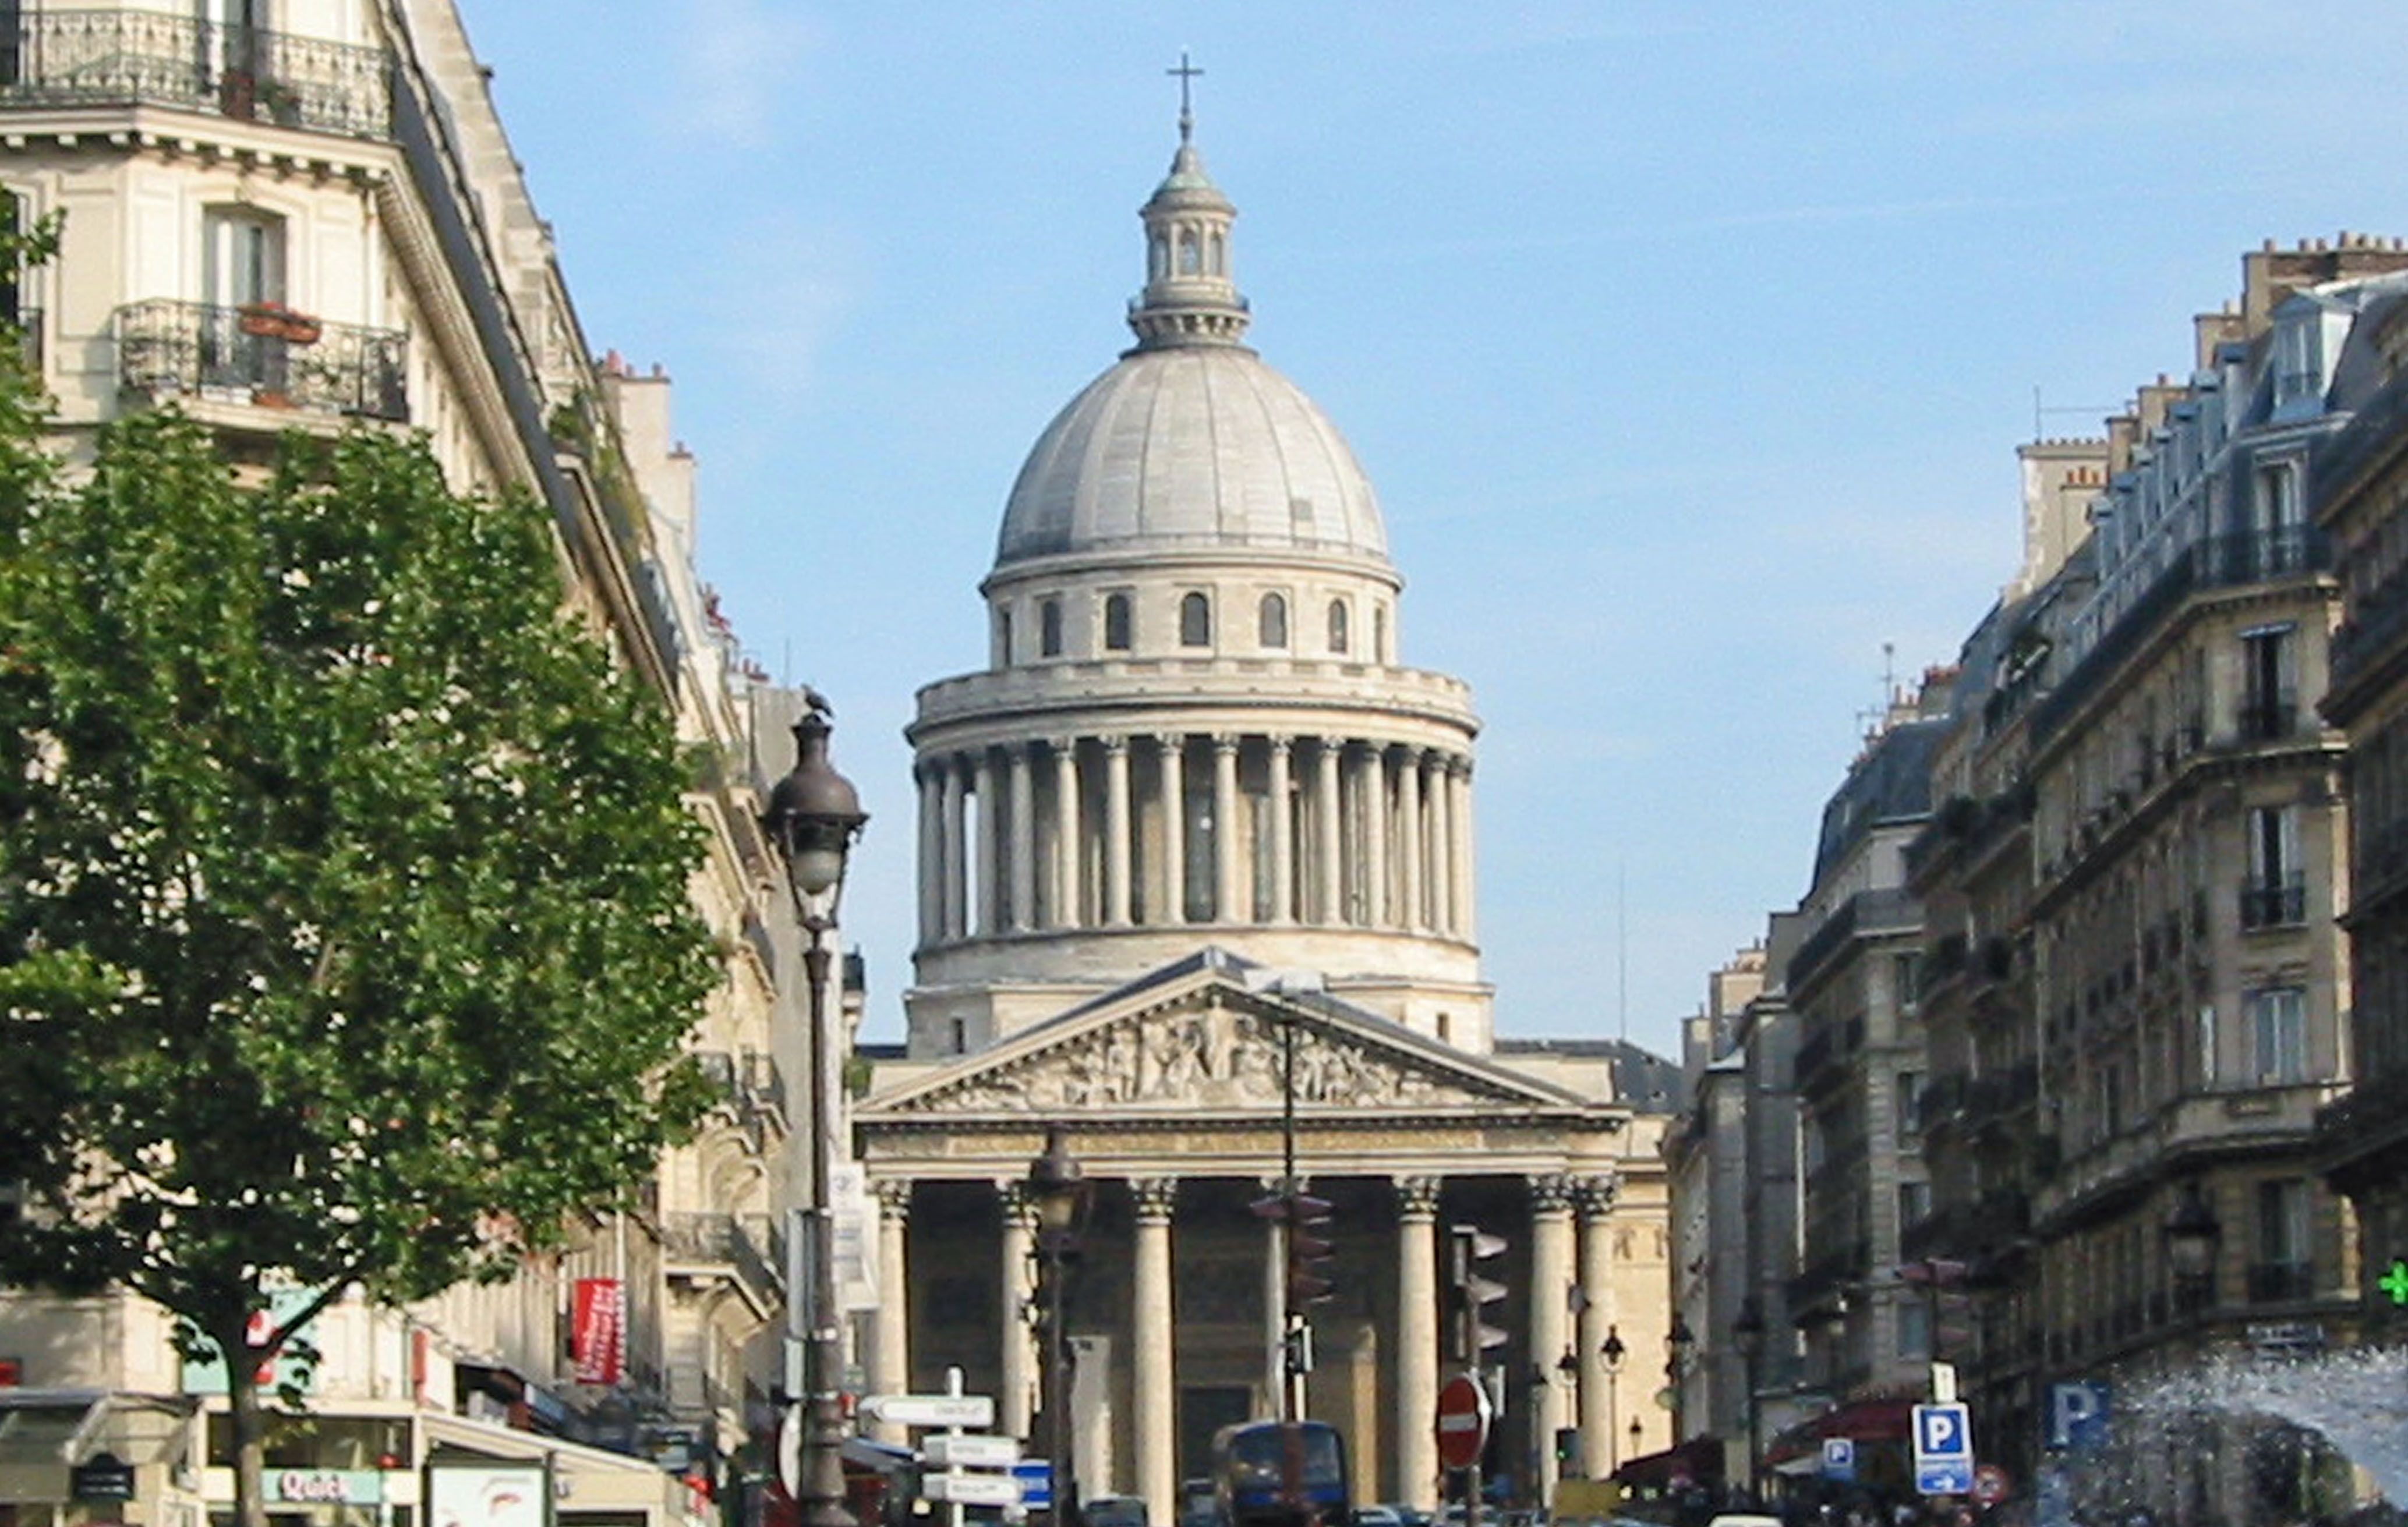 The Pantheon of Paris (Photo by Don Knebel)